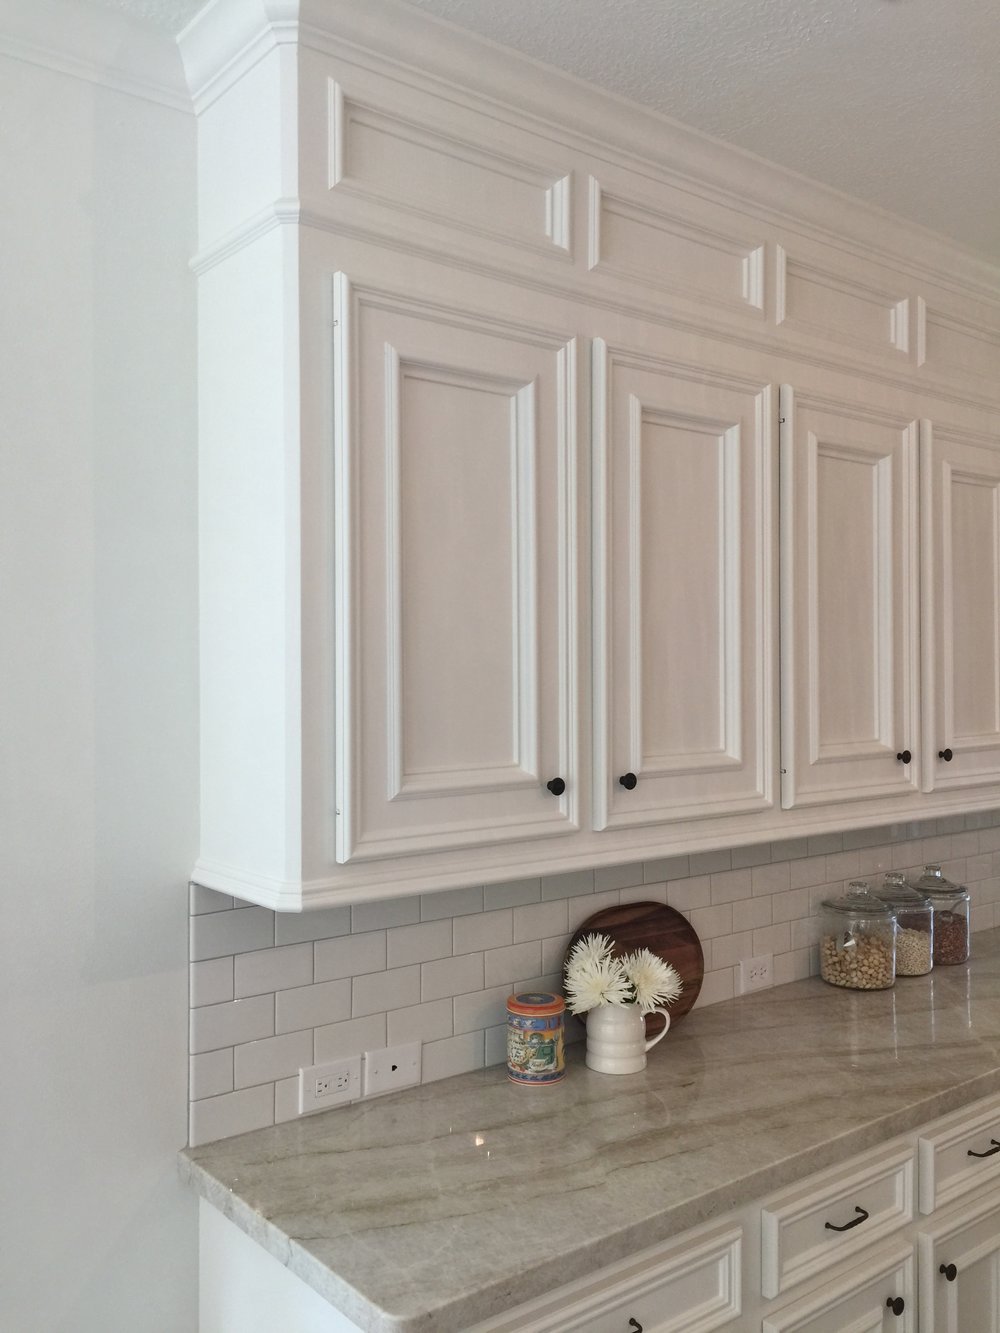 3 Cabinet Remodeling Details That Really Transform Your Standard Cabinetry  — DESIGNED